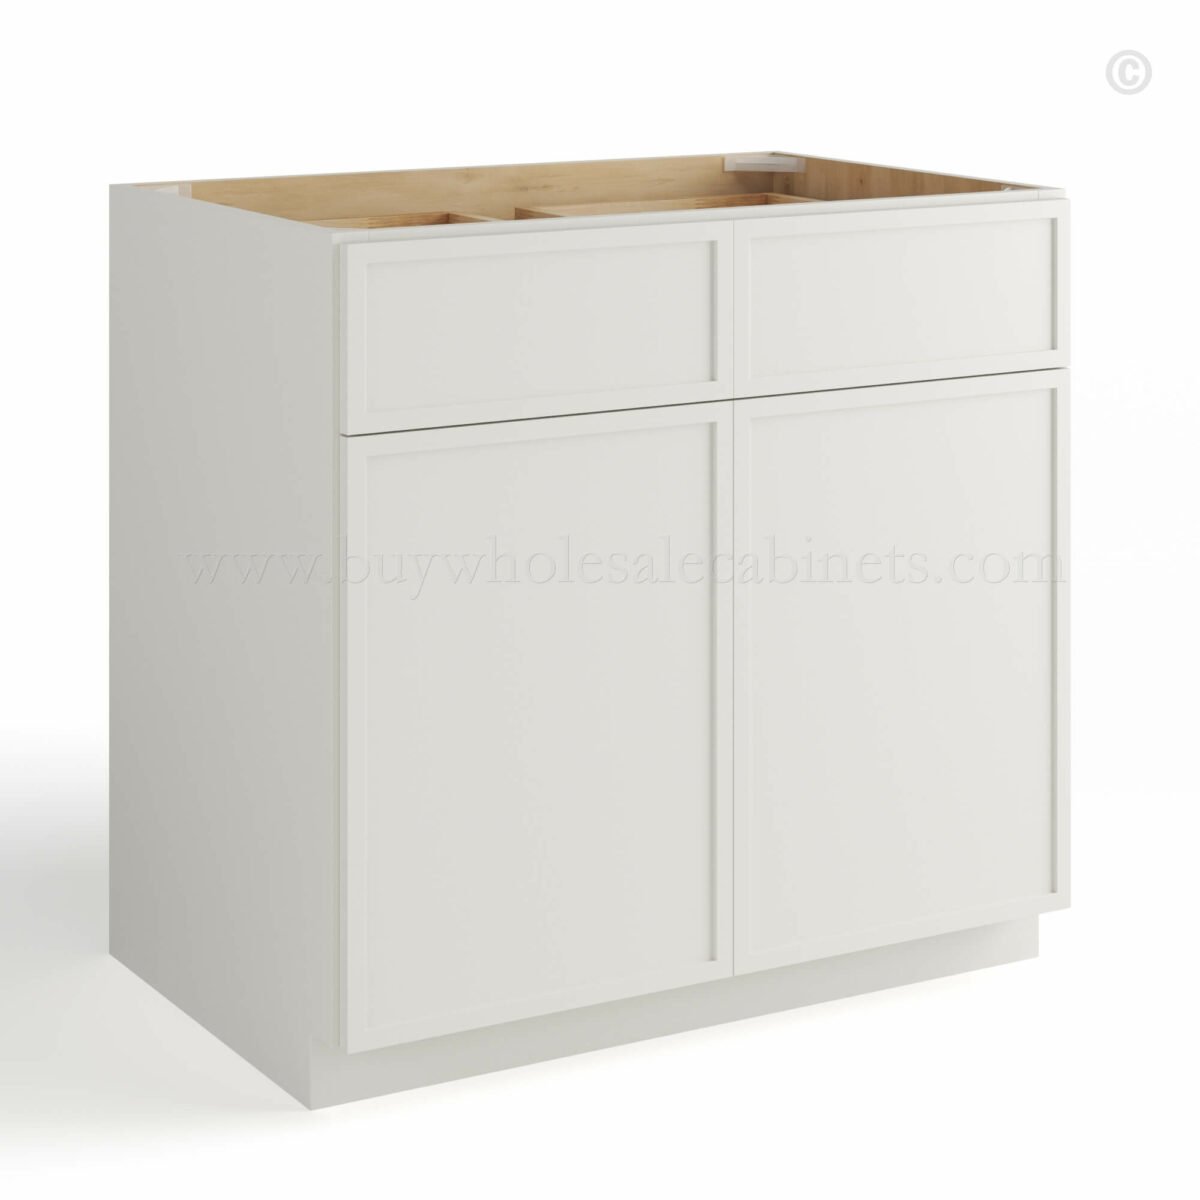 slim shaker cabinets, Dove White Slim Shaker Base Cabinet Double Doors and Drawers